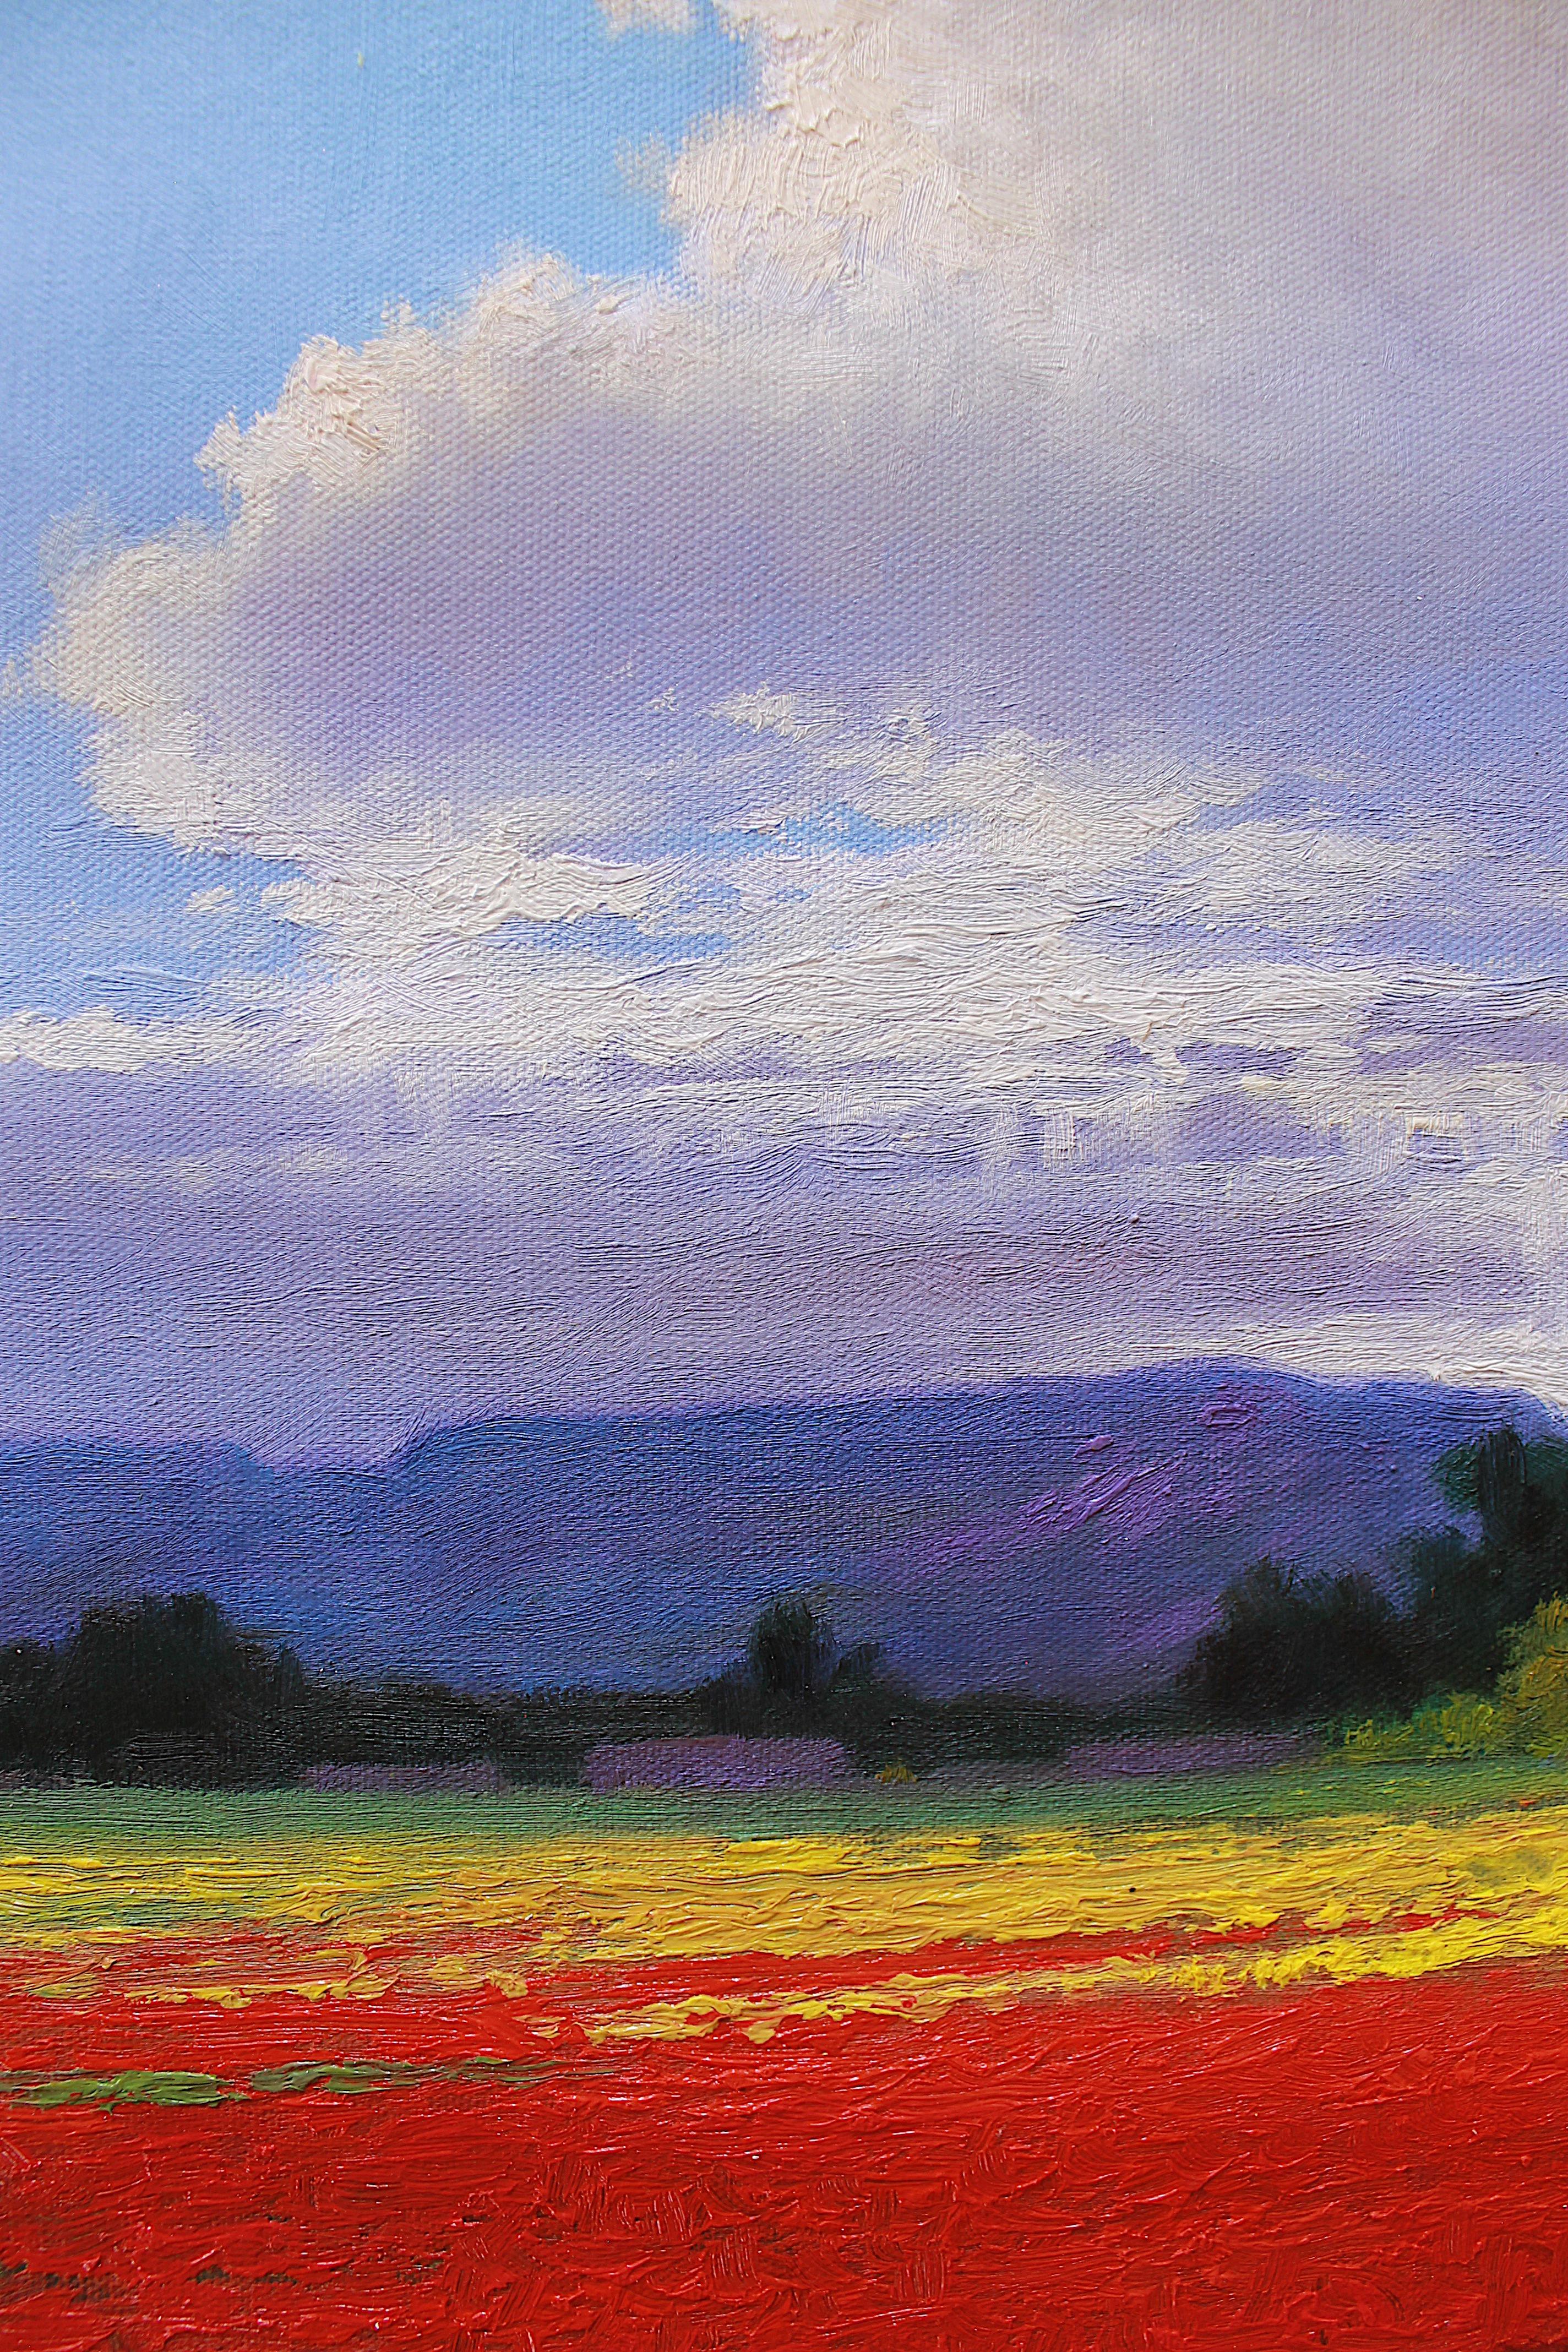 Field and sky - Original oil painting - Impressionist - Painting by Sonco Carrasco